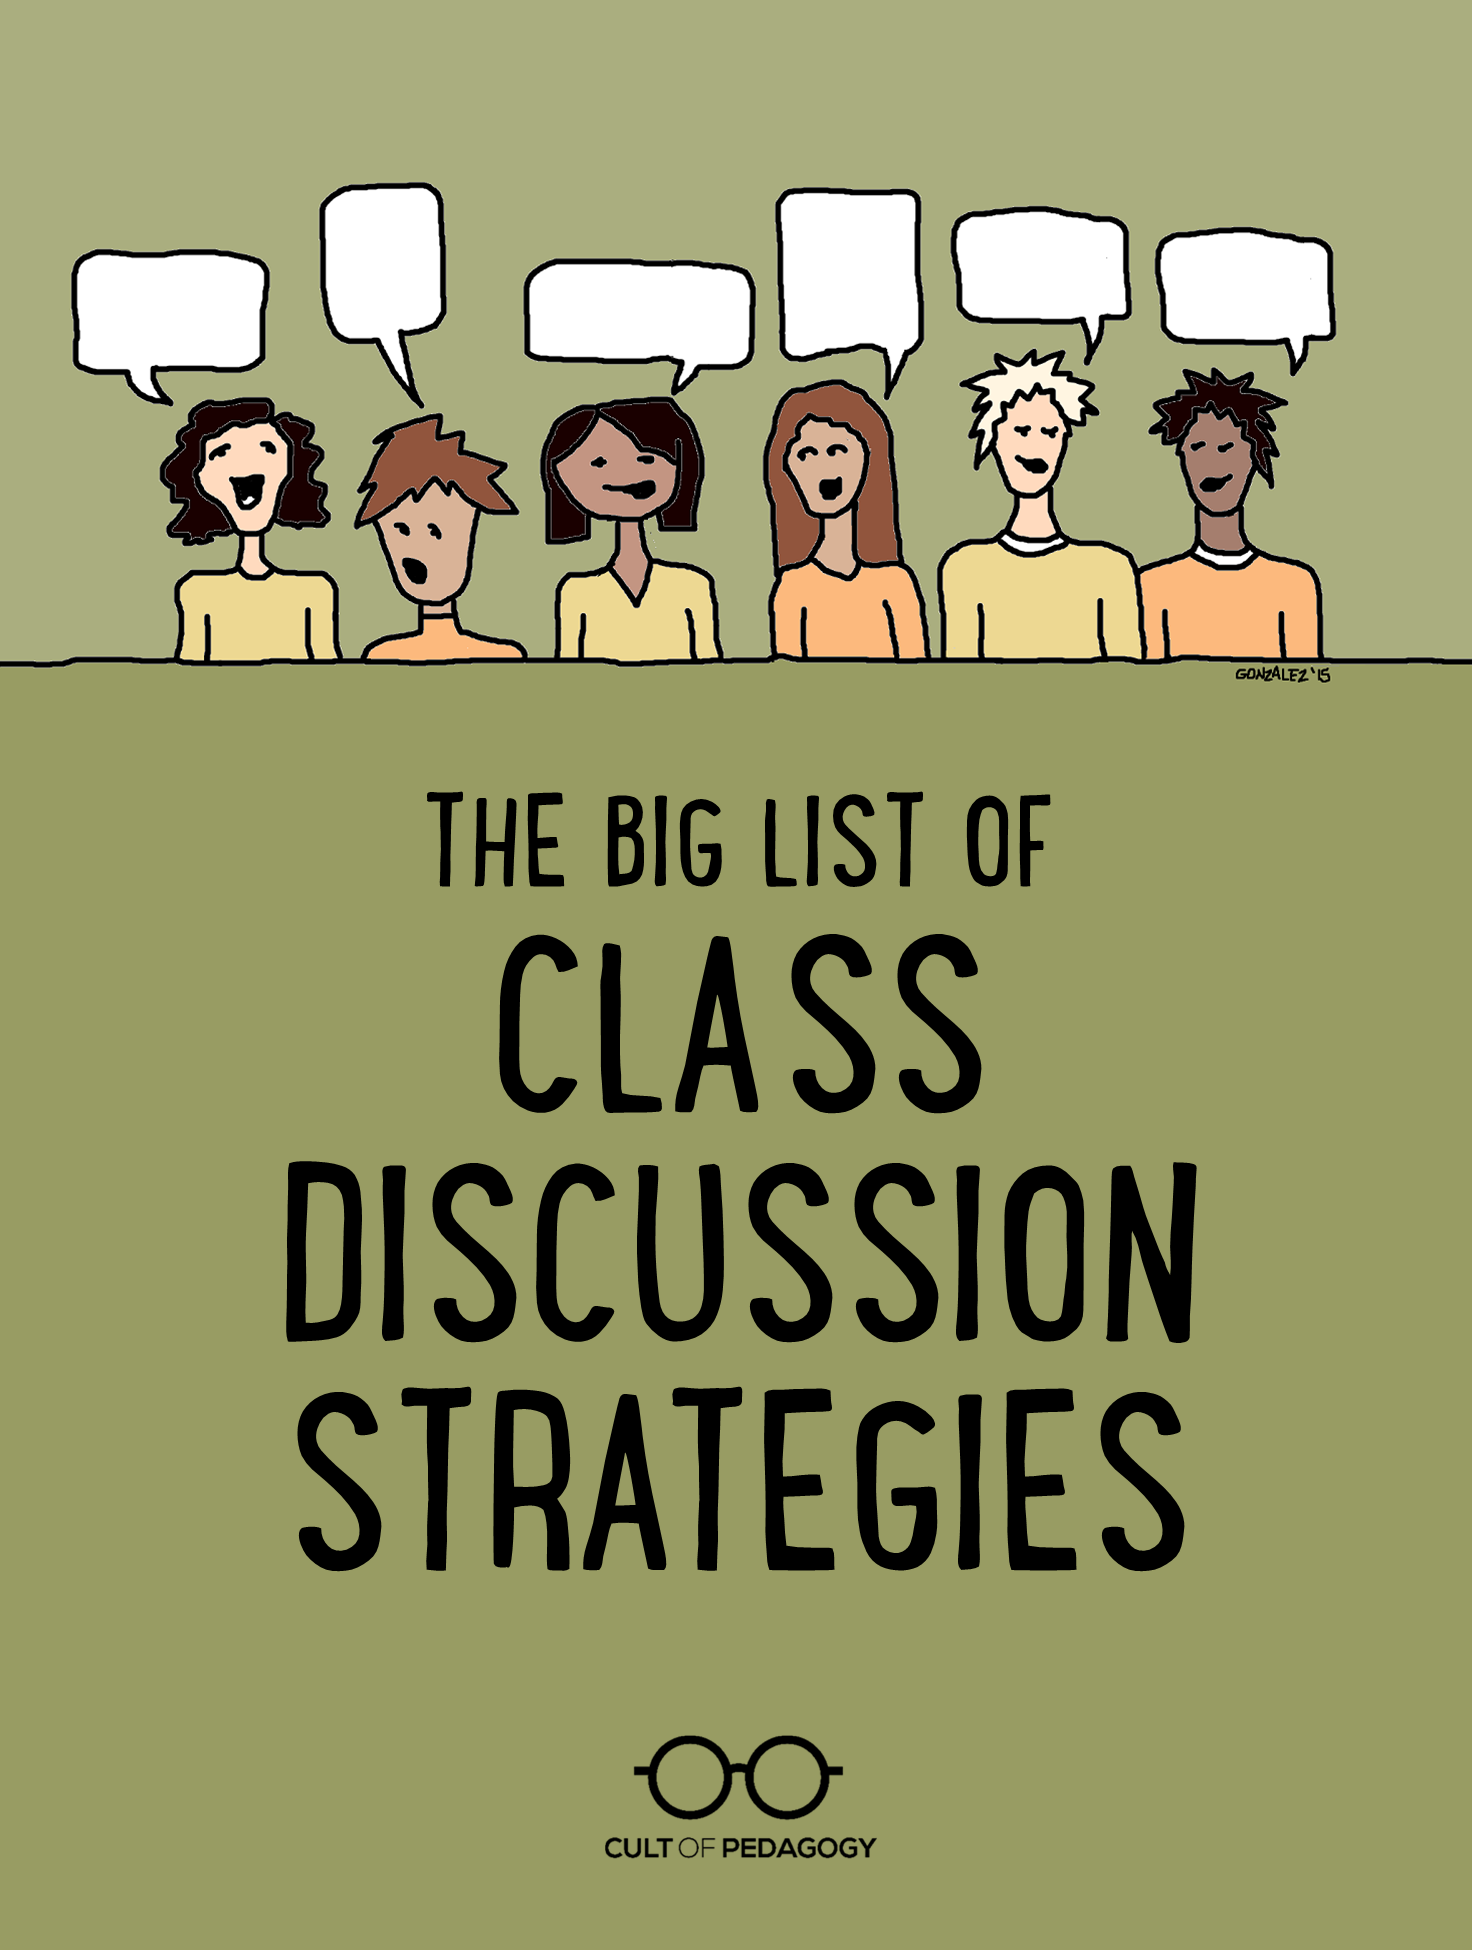 The Big List of Class Discussion Strategies | Cult of Pedagogy